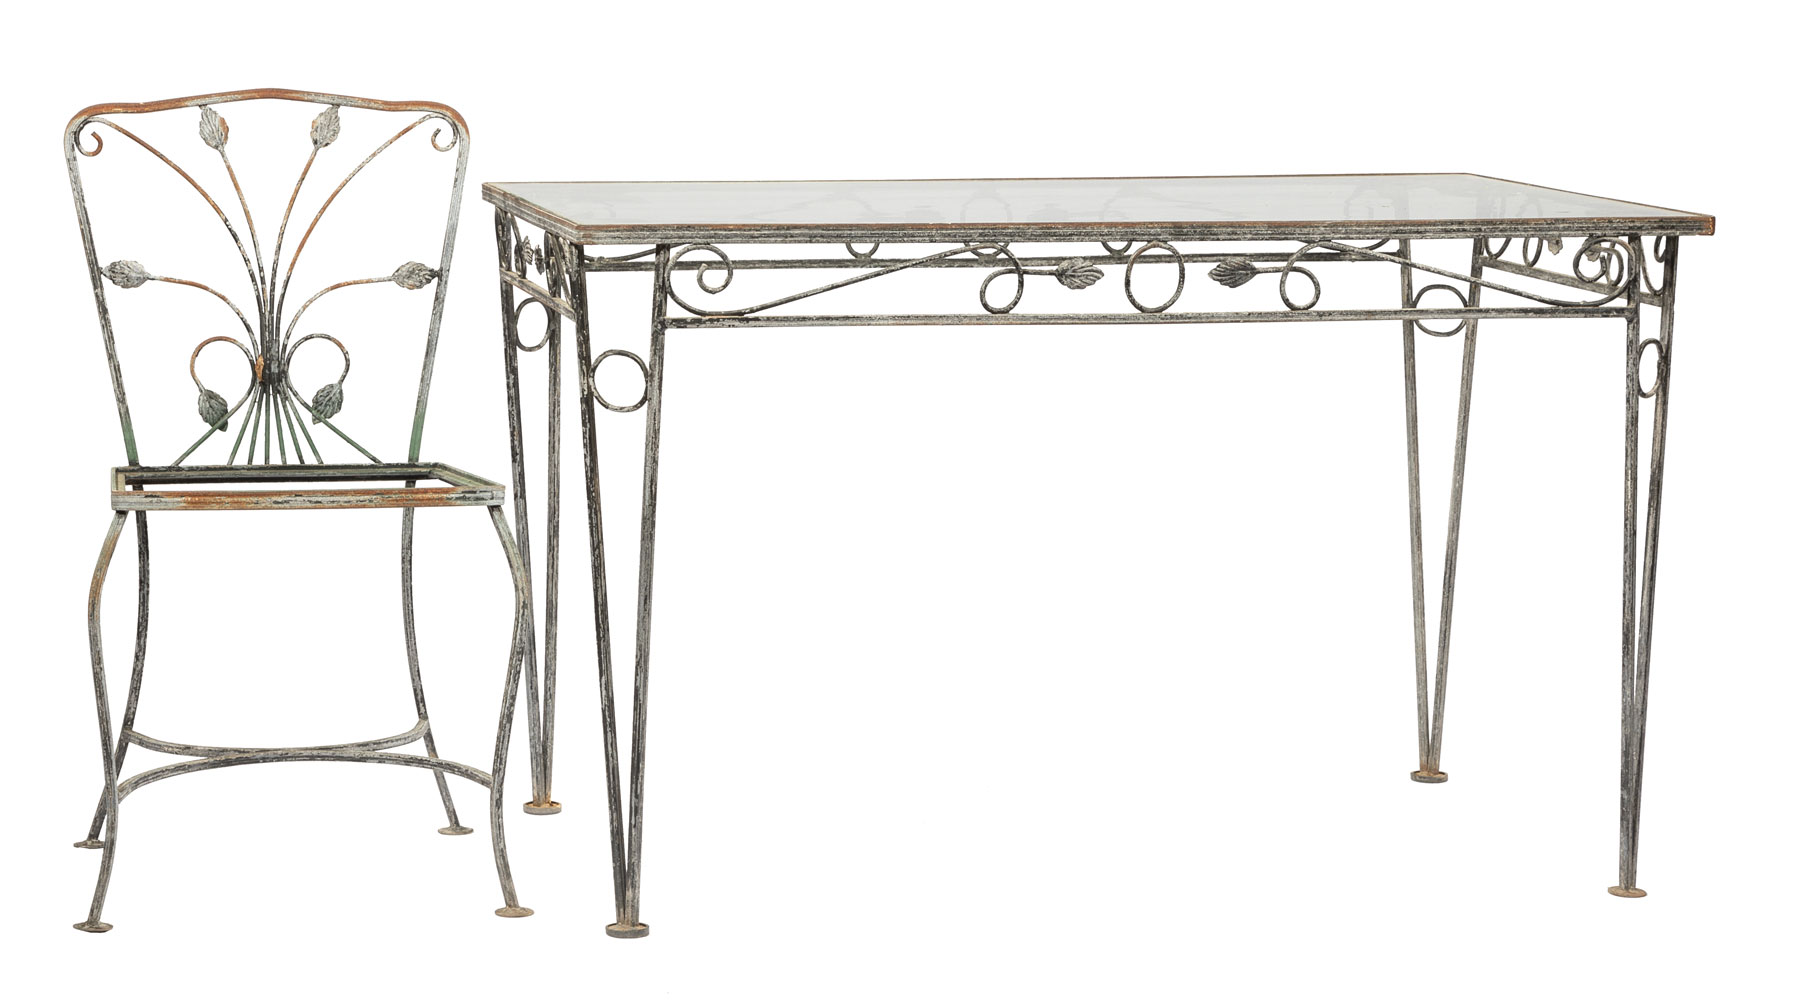 Vintage Wrought Iron Garden Suite, incl. four chairs and table with associated glass top, scroll and - Image 2 of 5